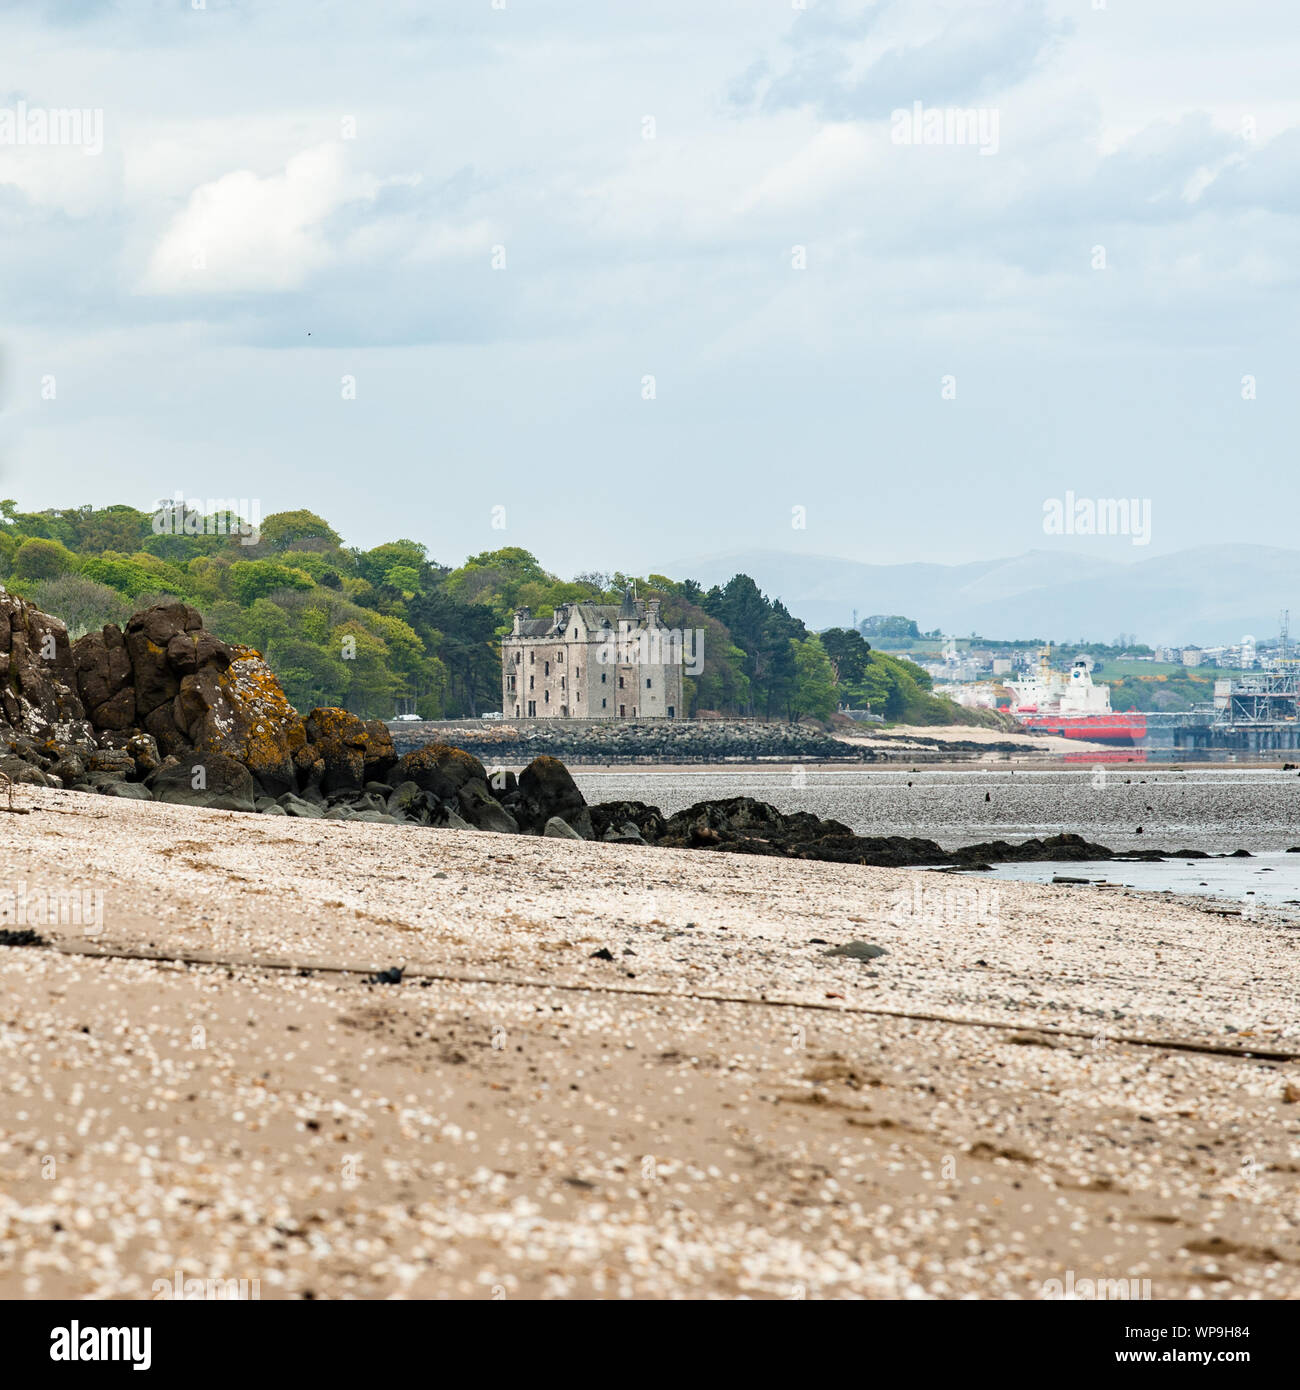 Scottish coastline covered by seashells and an old castle Stock Photo